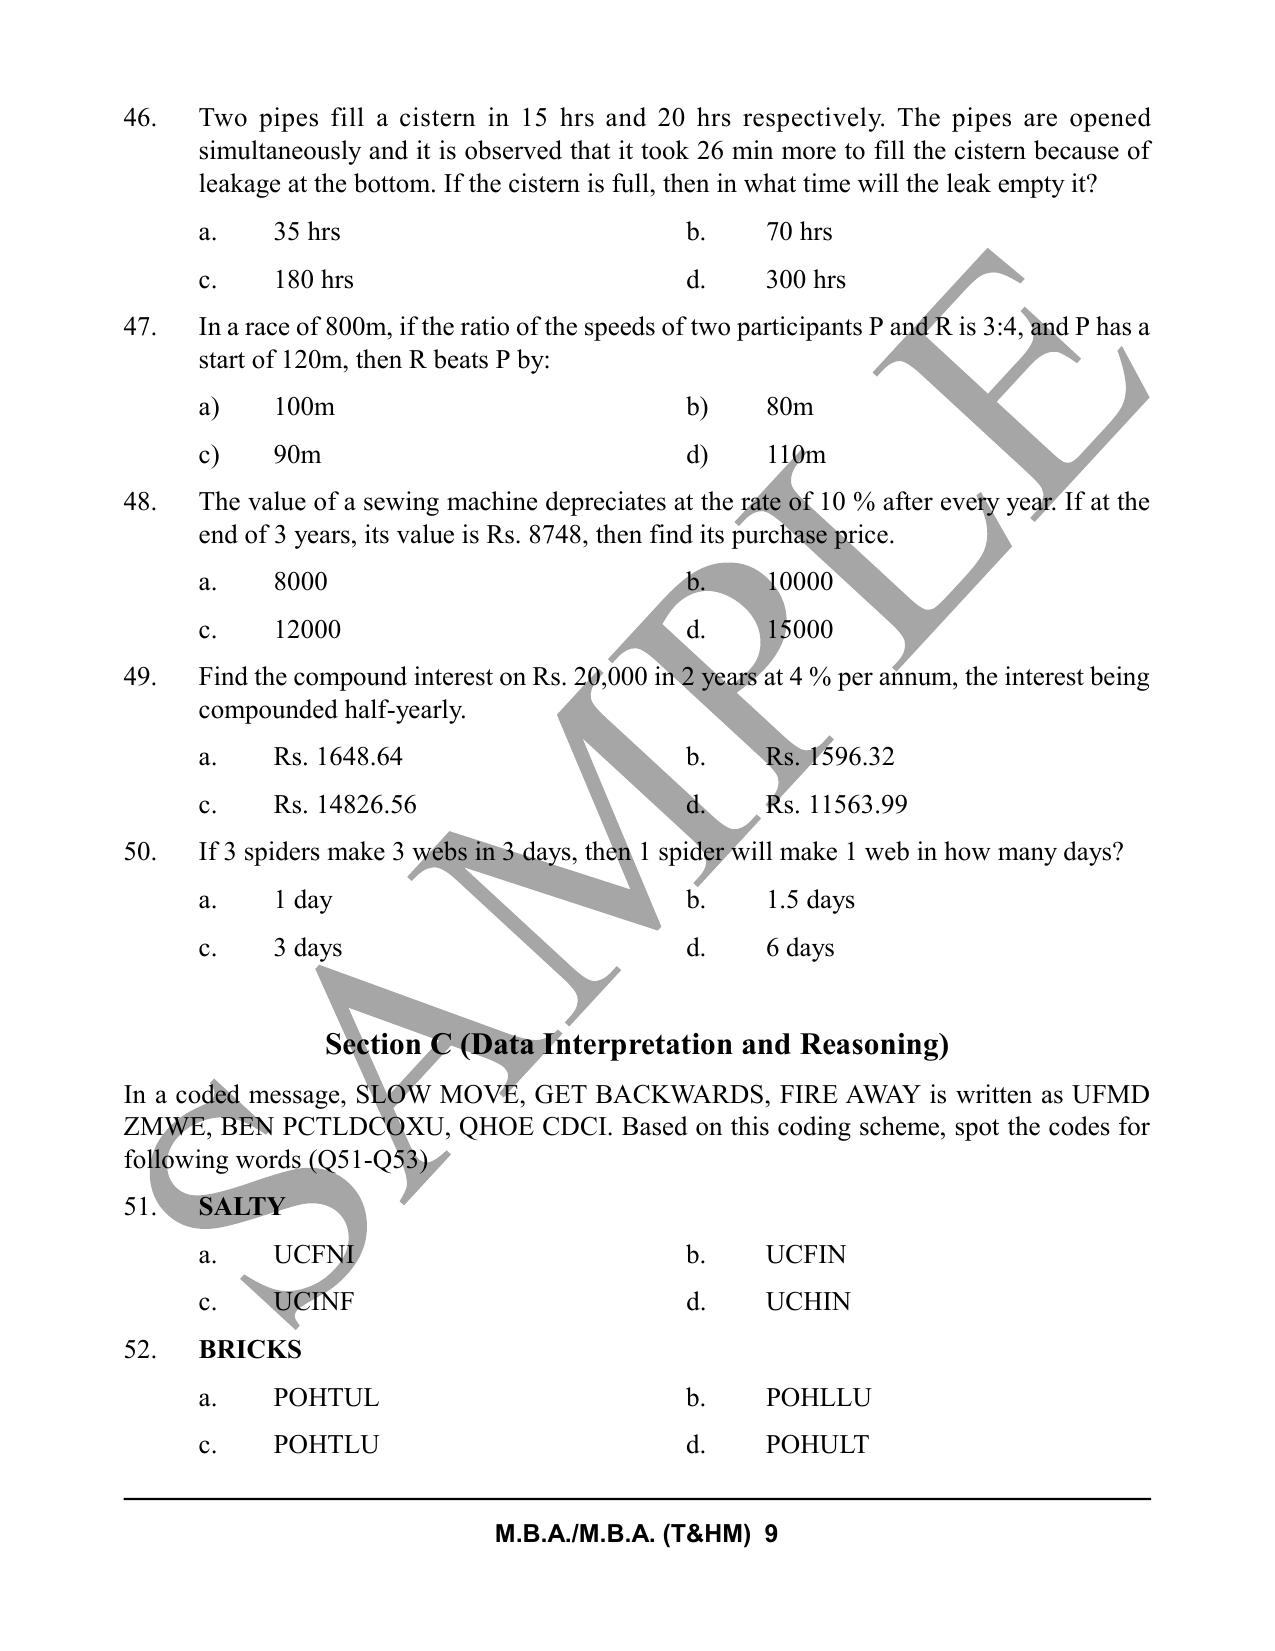 HPCET MBA and MBA (T&HM) Sample Paper 2023 Sample Paper - Page 9